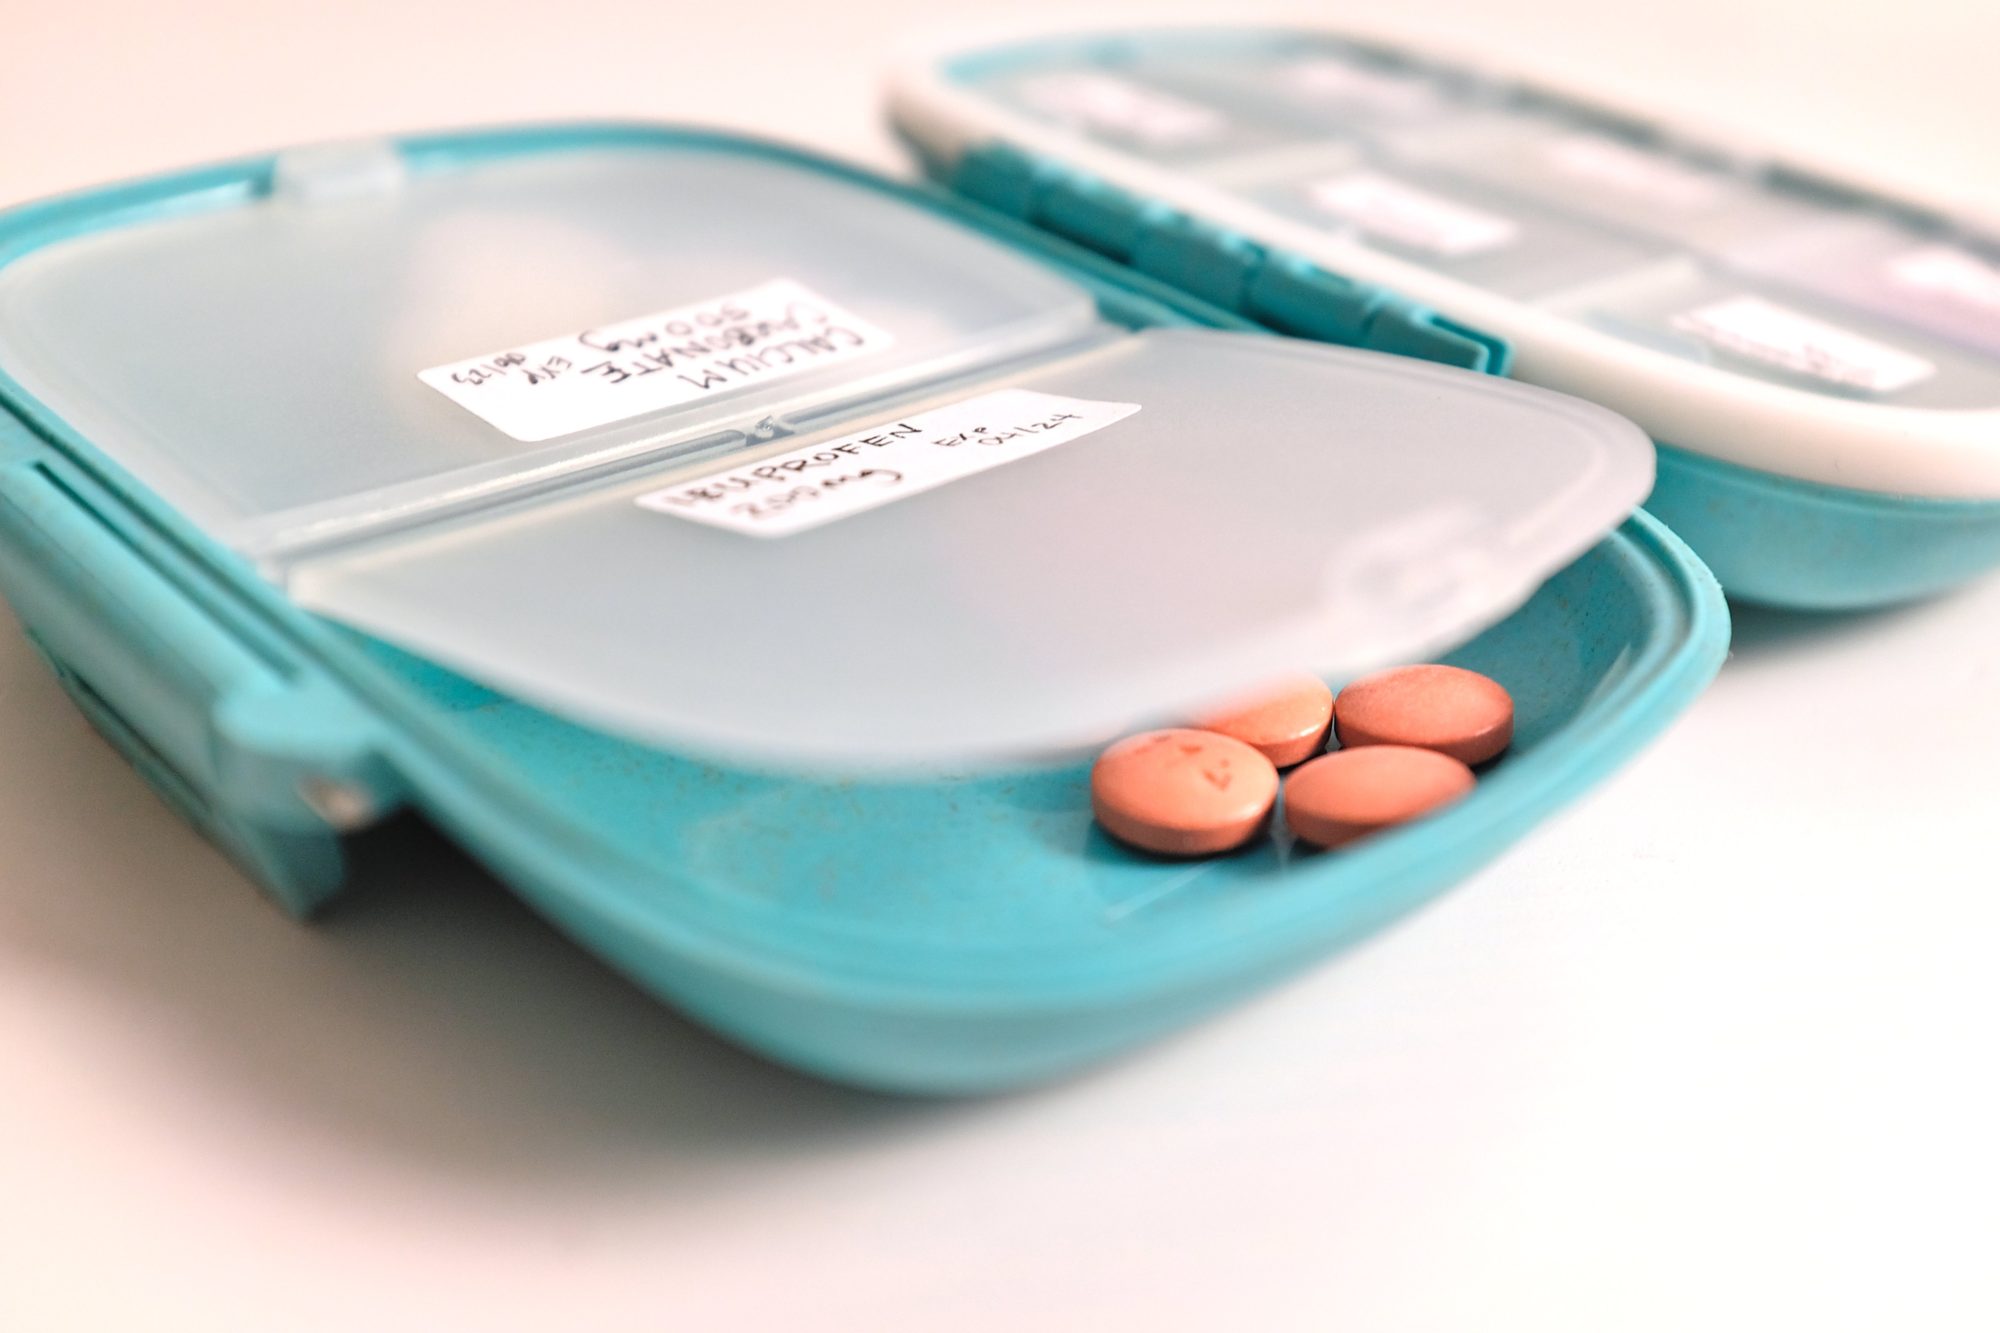 An open travel pillbox containing over the counter medications and supplements